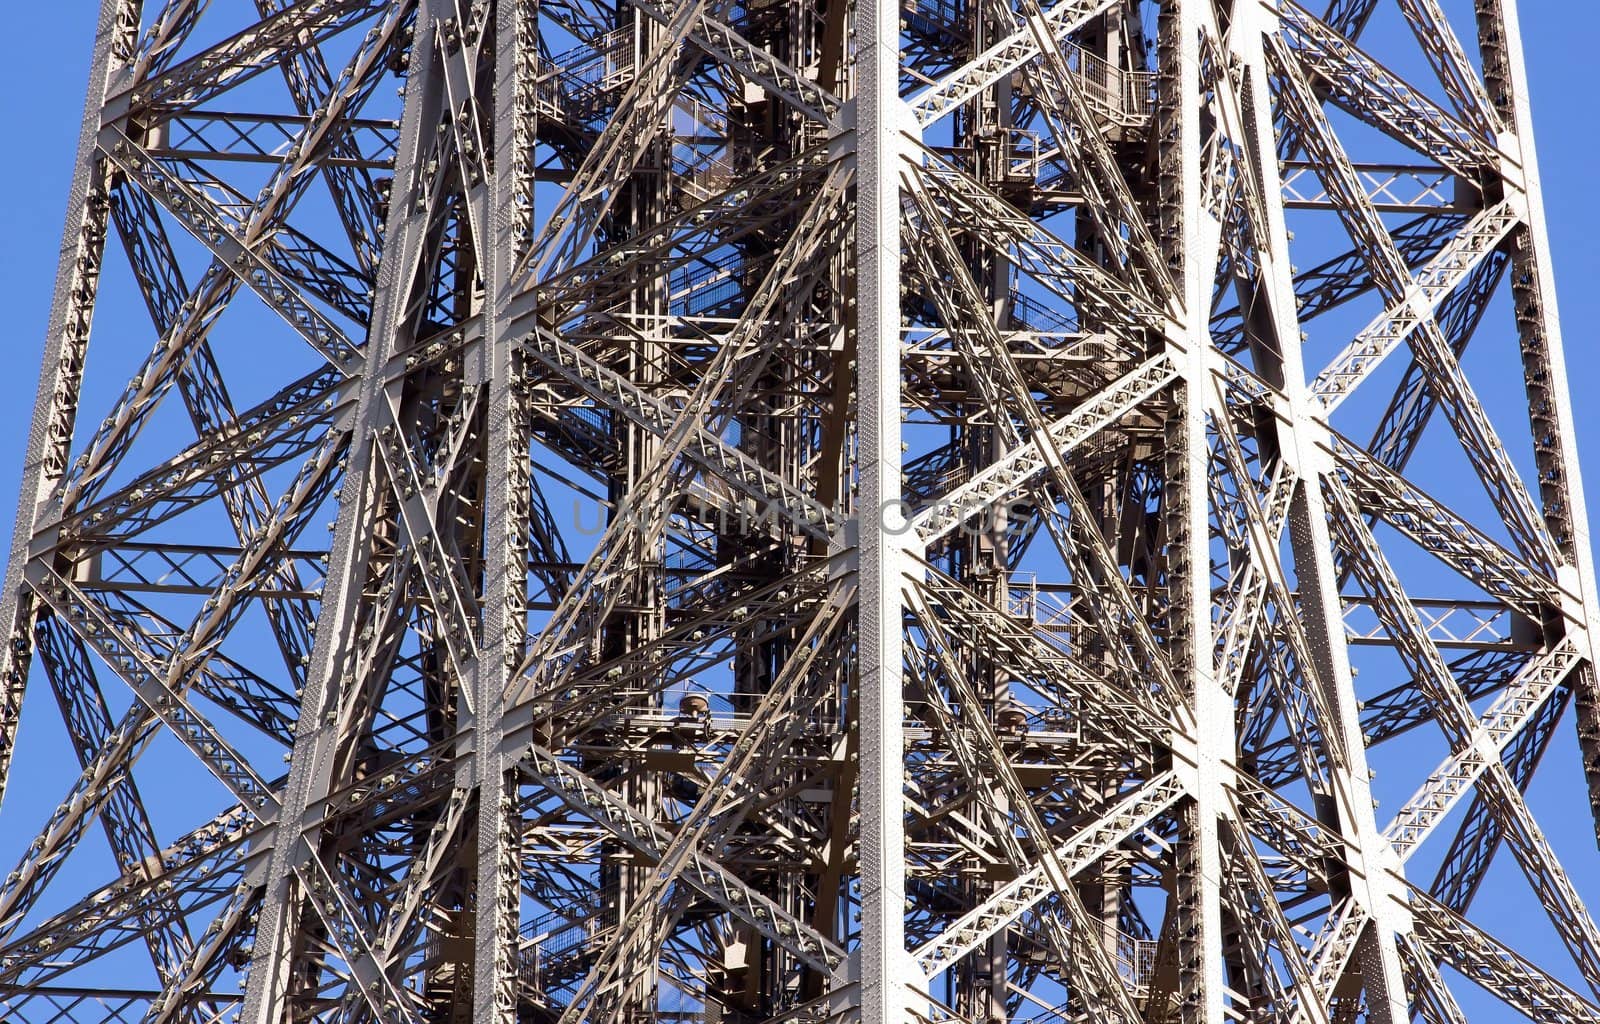 structure of steel of the Eiffel Tower   Paris France by neko92vl